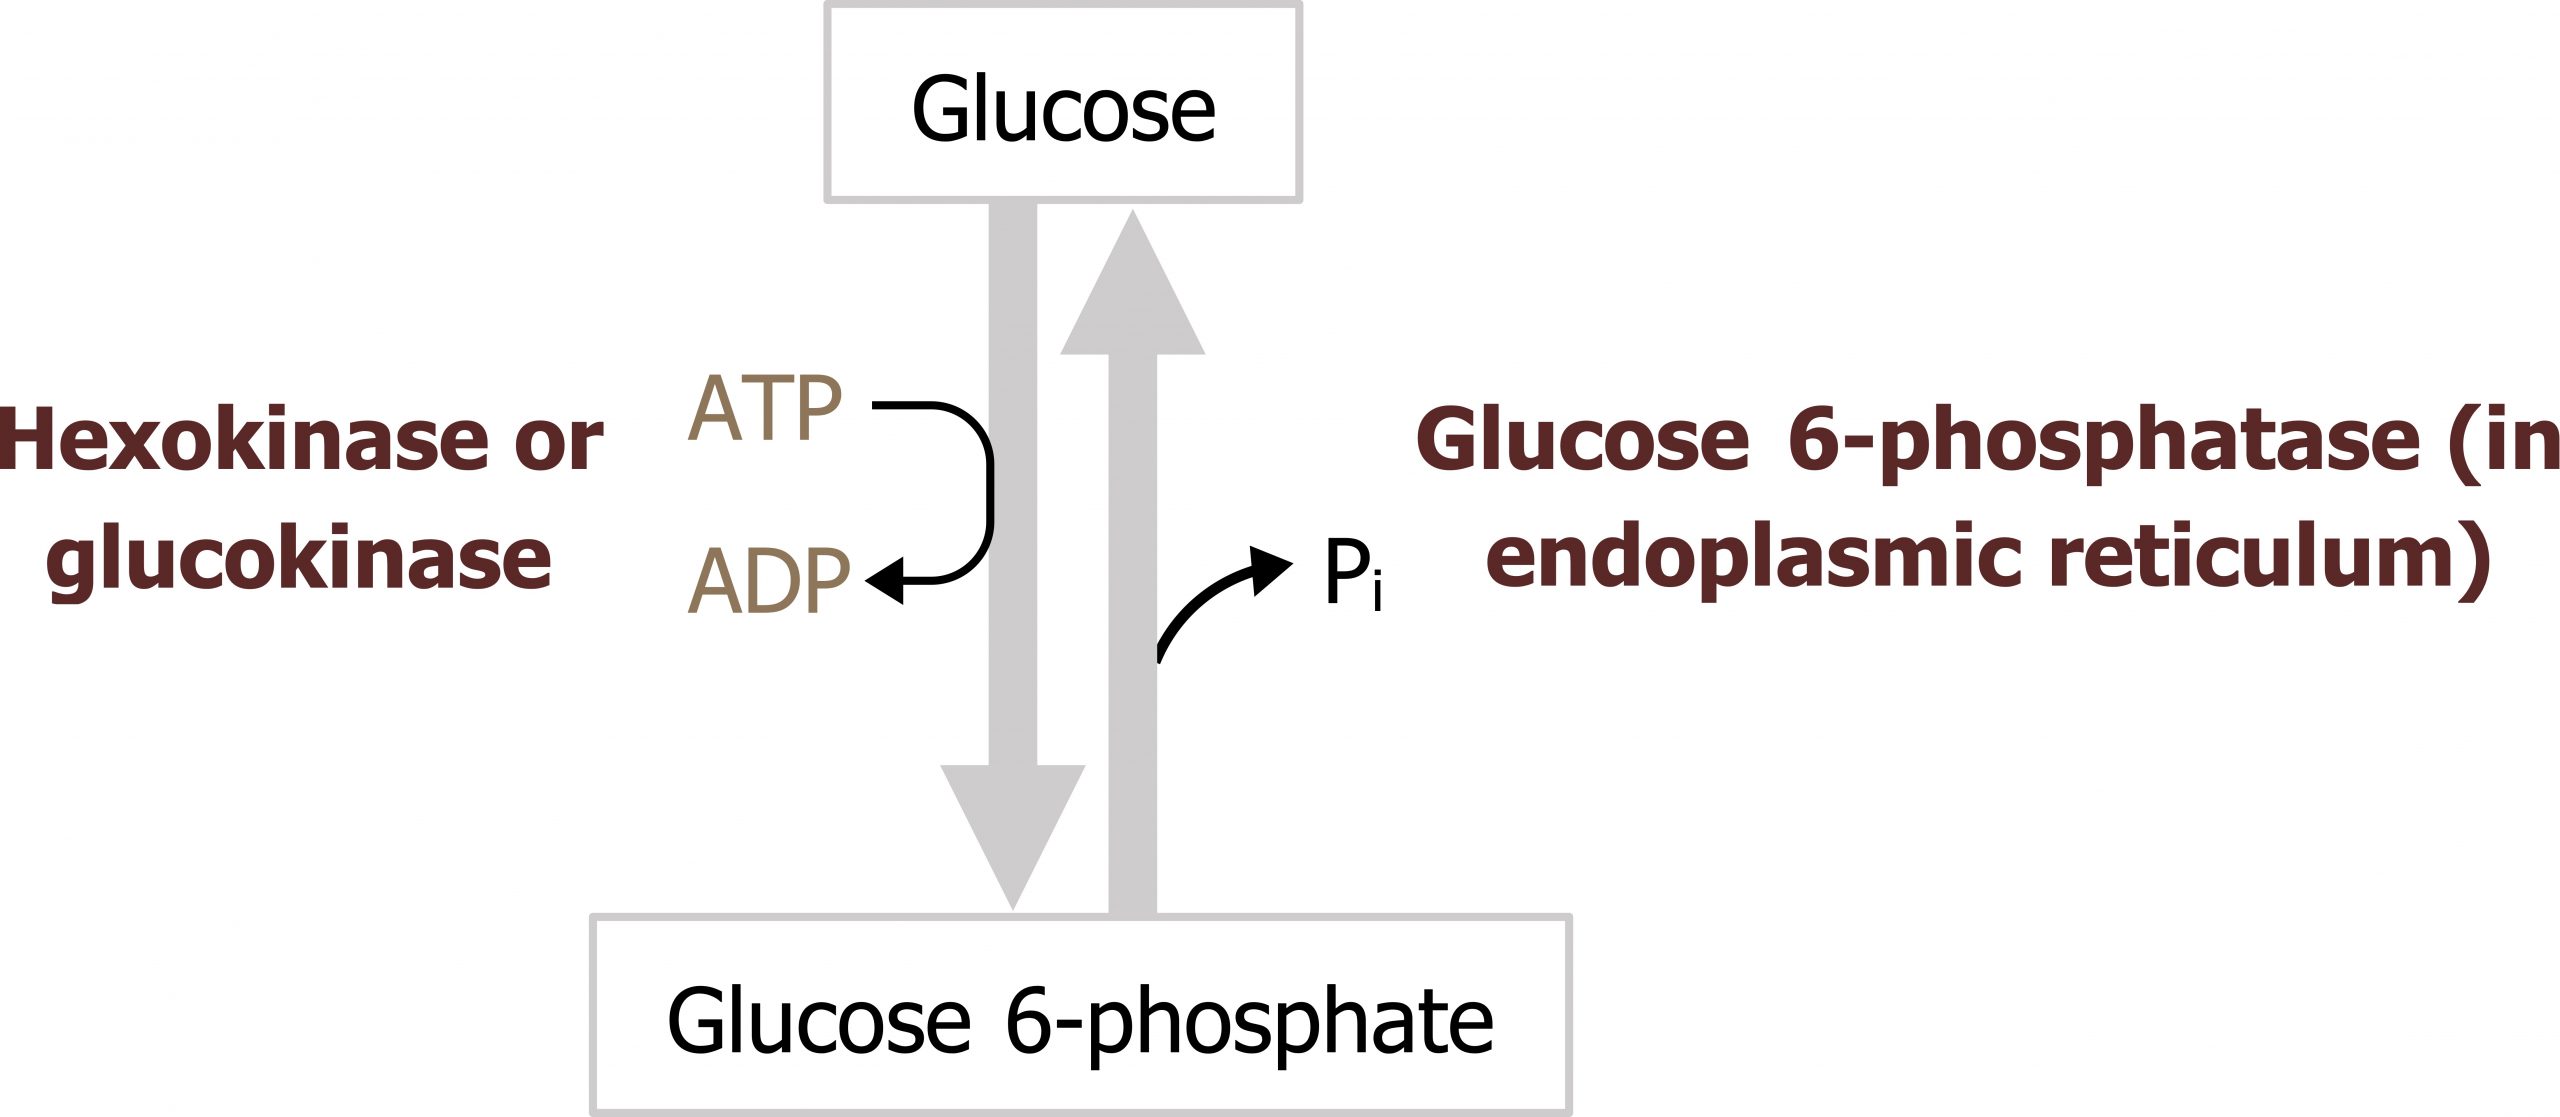 Glucose arrow with enzyme hexokinase or glucokinase and ATP arrow ADP to glucose 6-phosphate. Glucose 6-phosphate arrow with enzyme Glucose 6-phosphate (in endoplasmic reticulum) with loss of Pi to glucose.